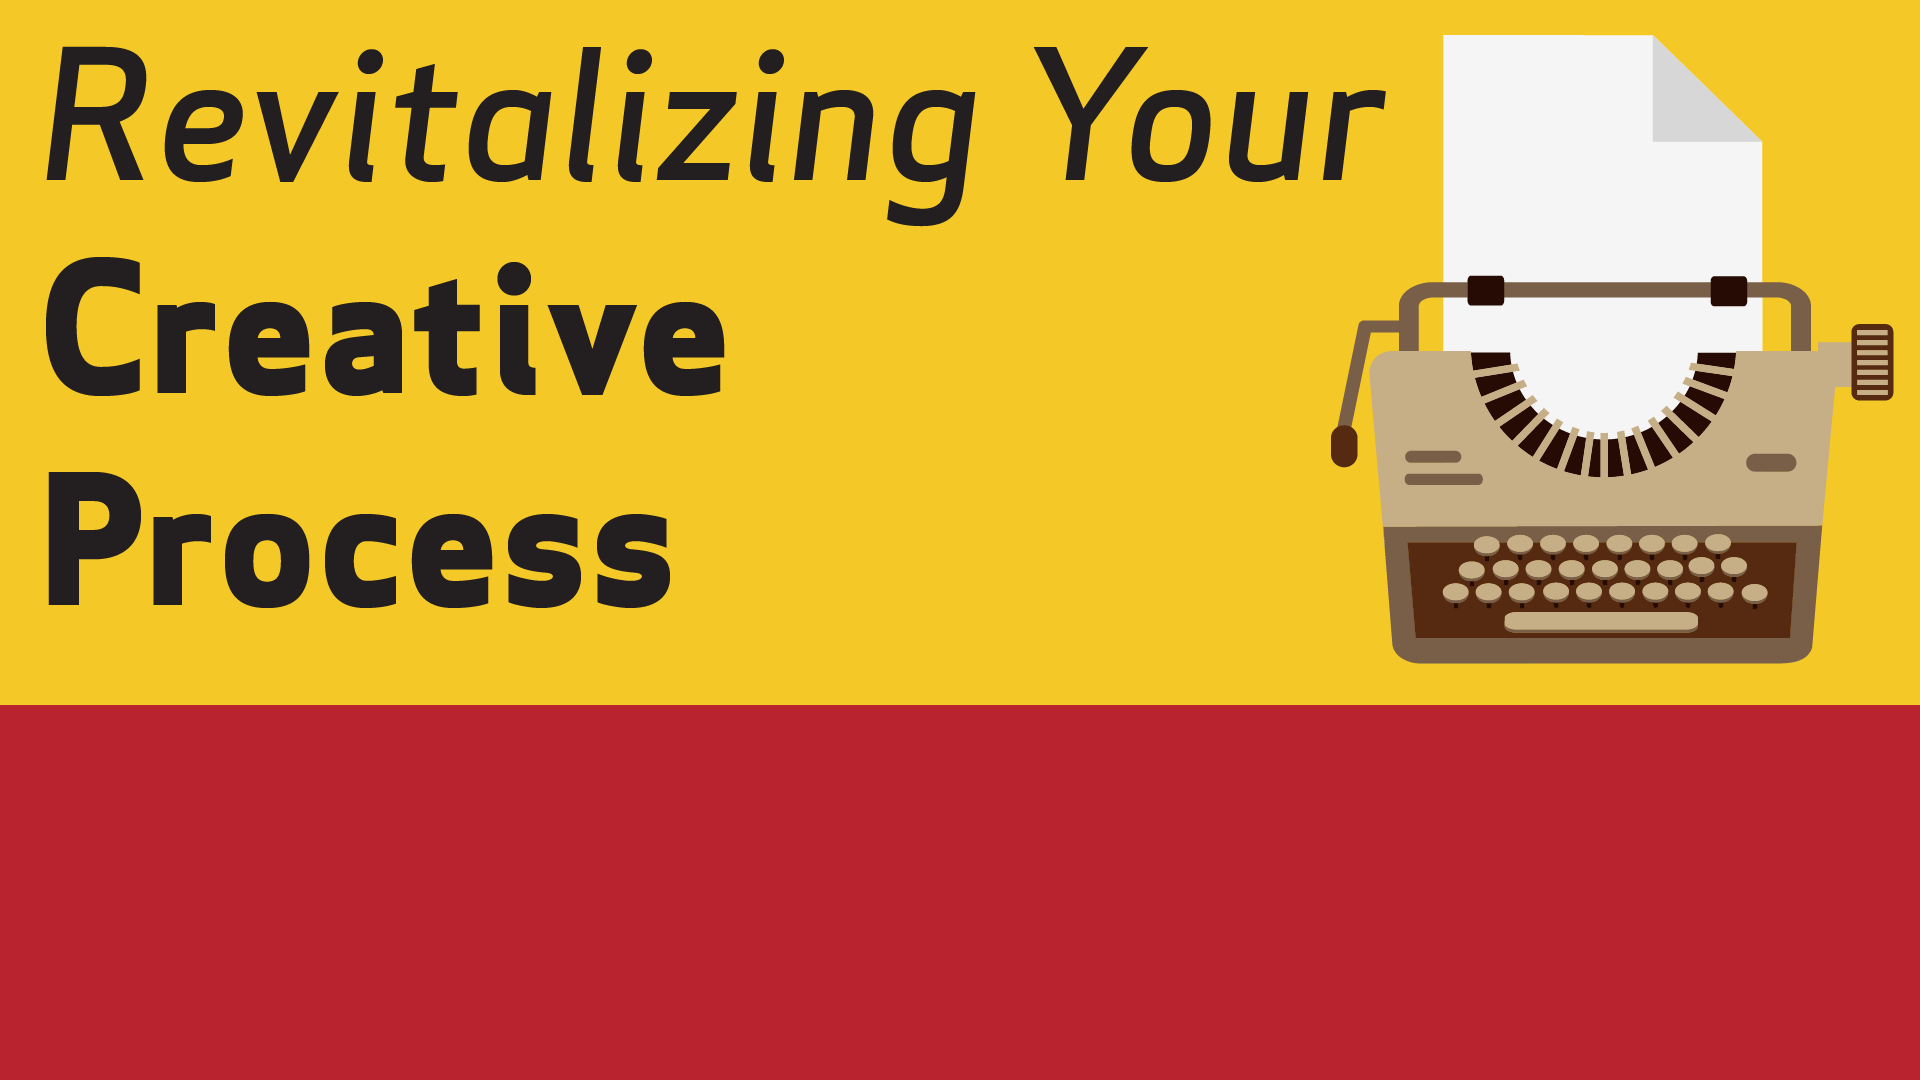 Revitalizing Your Creative Process